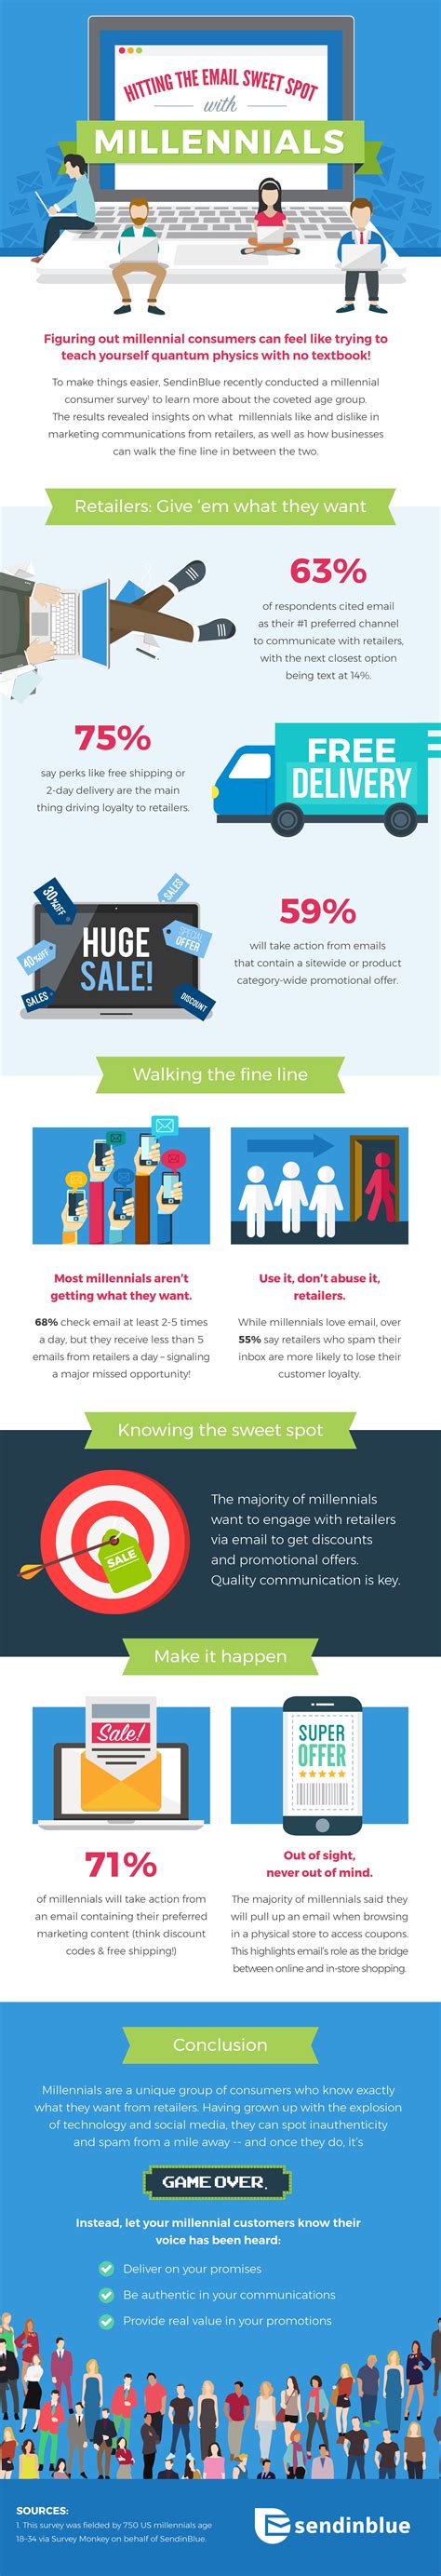 Hitting The Marketing Email Sweet Spot With Millennials Infographic